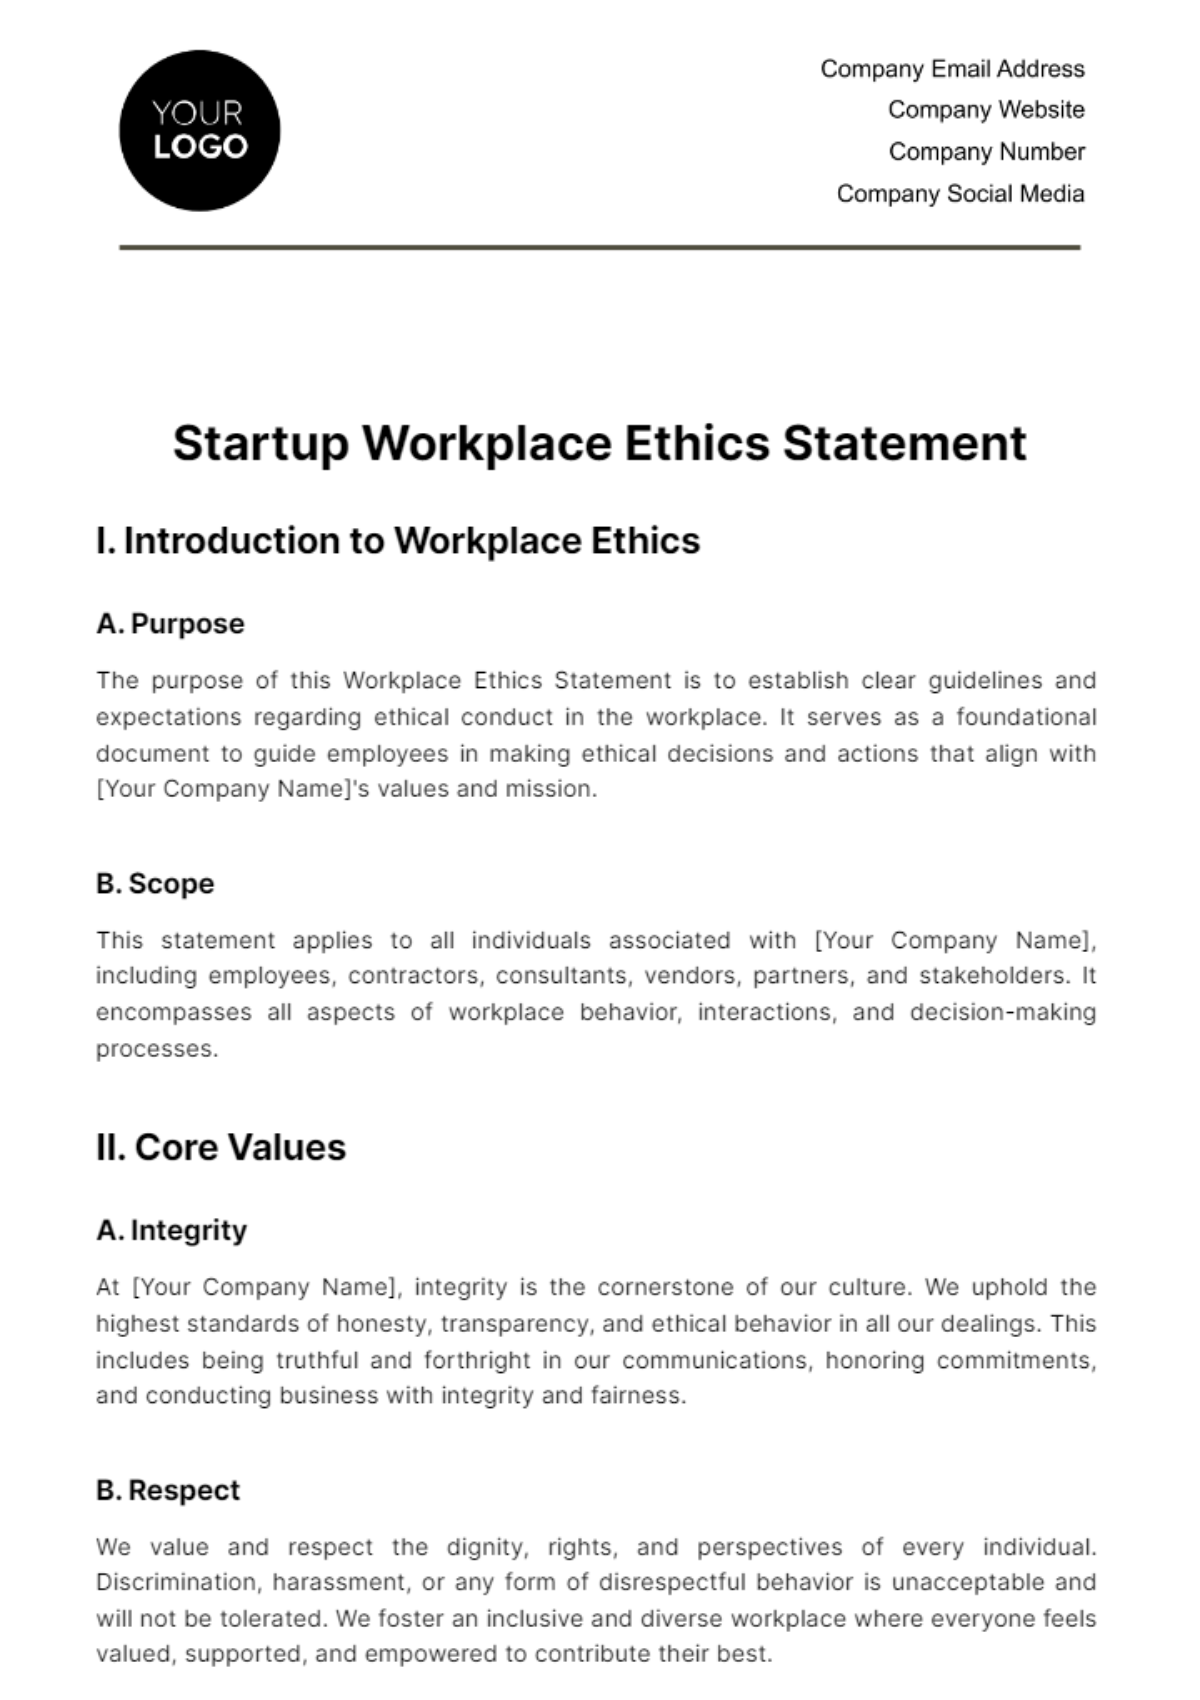 Startup Workplace Ethics Statement Template